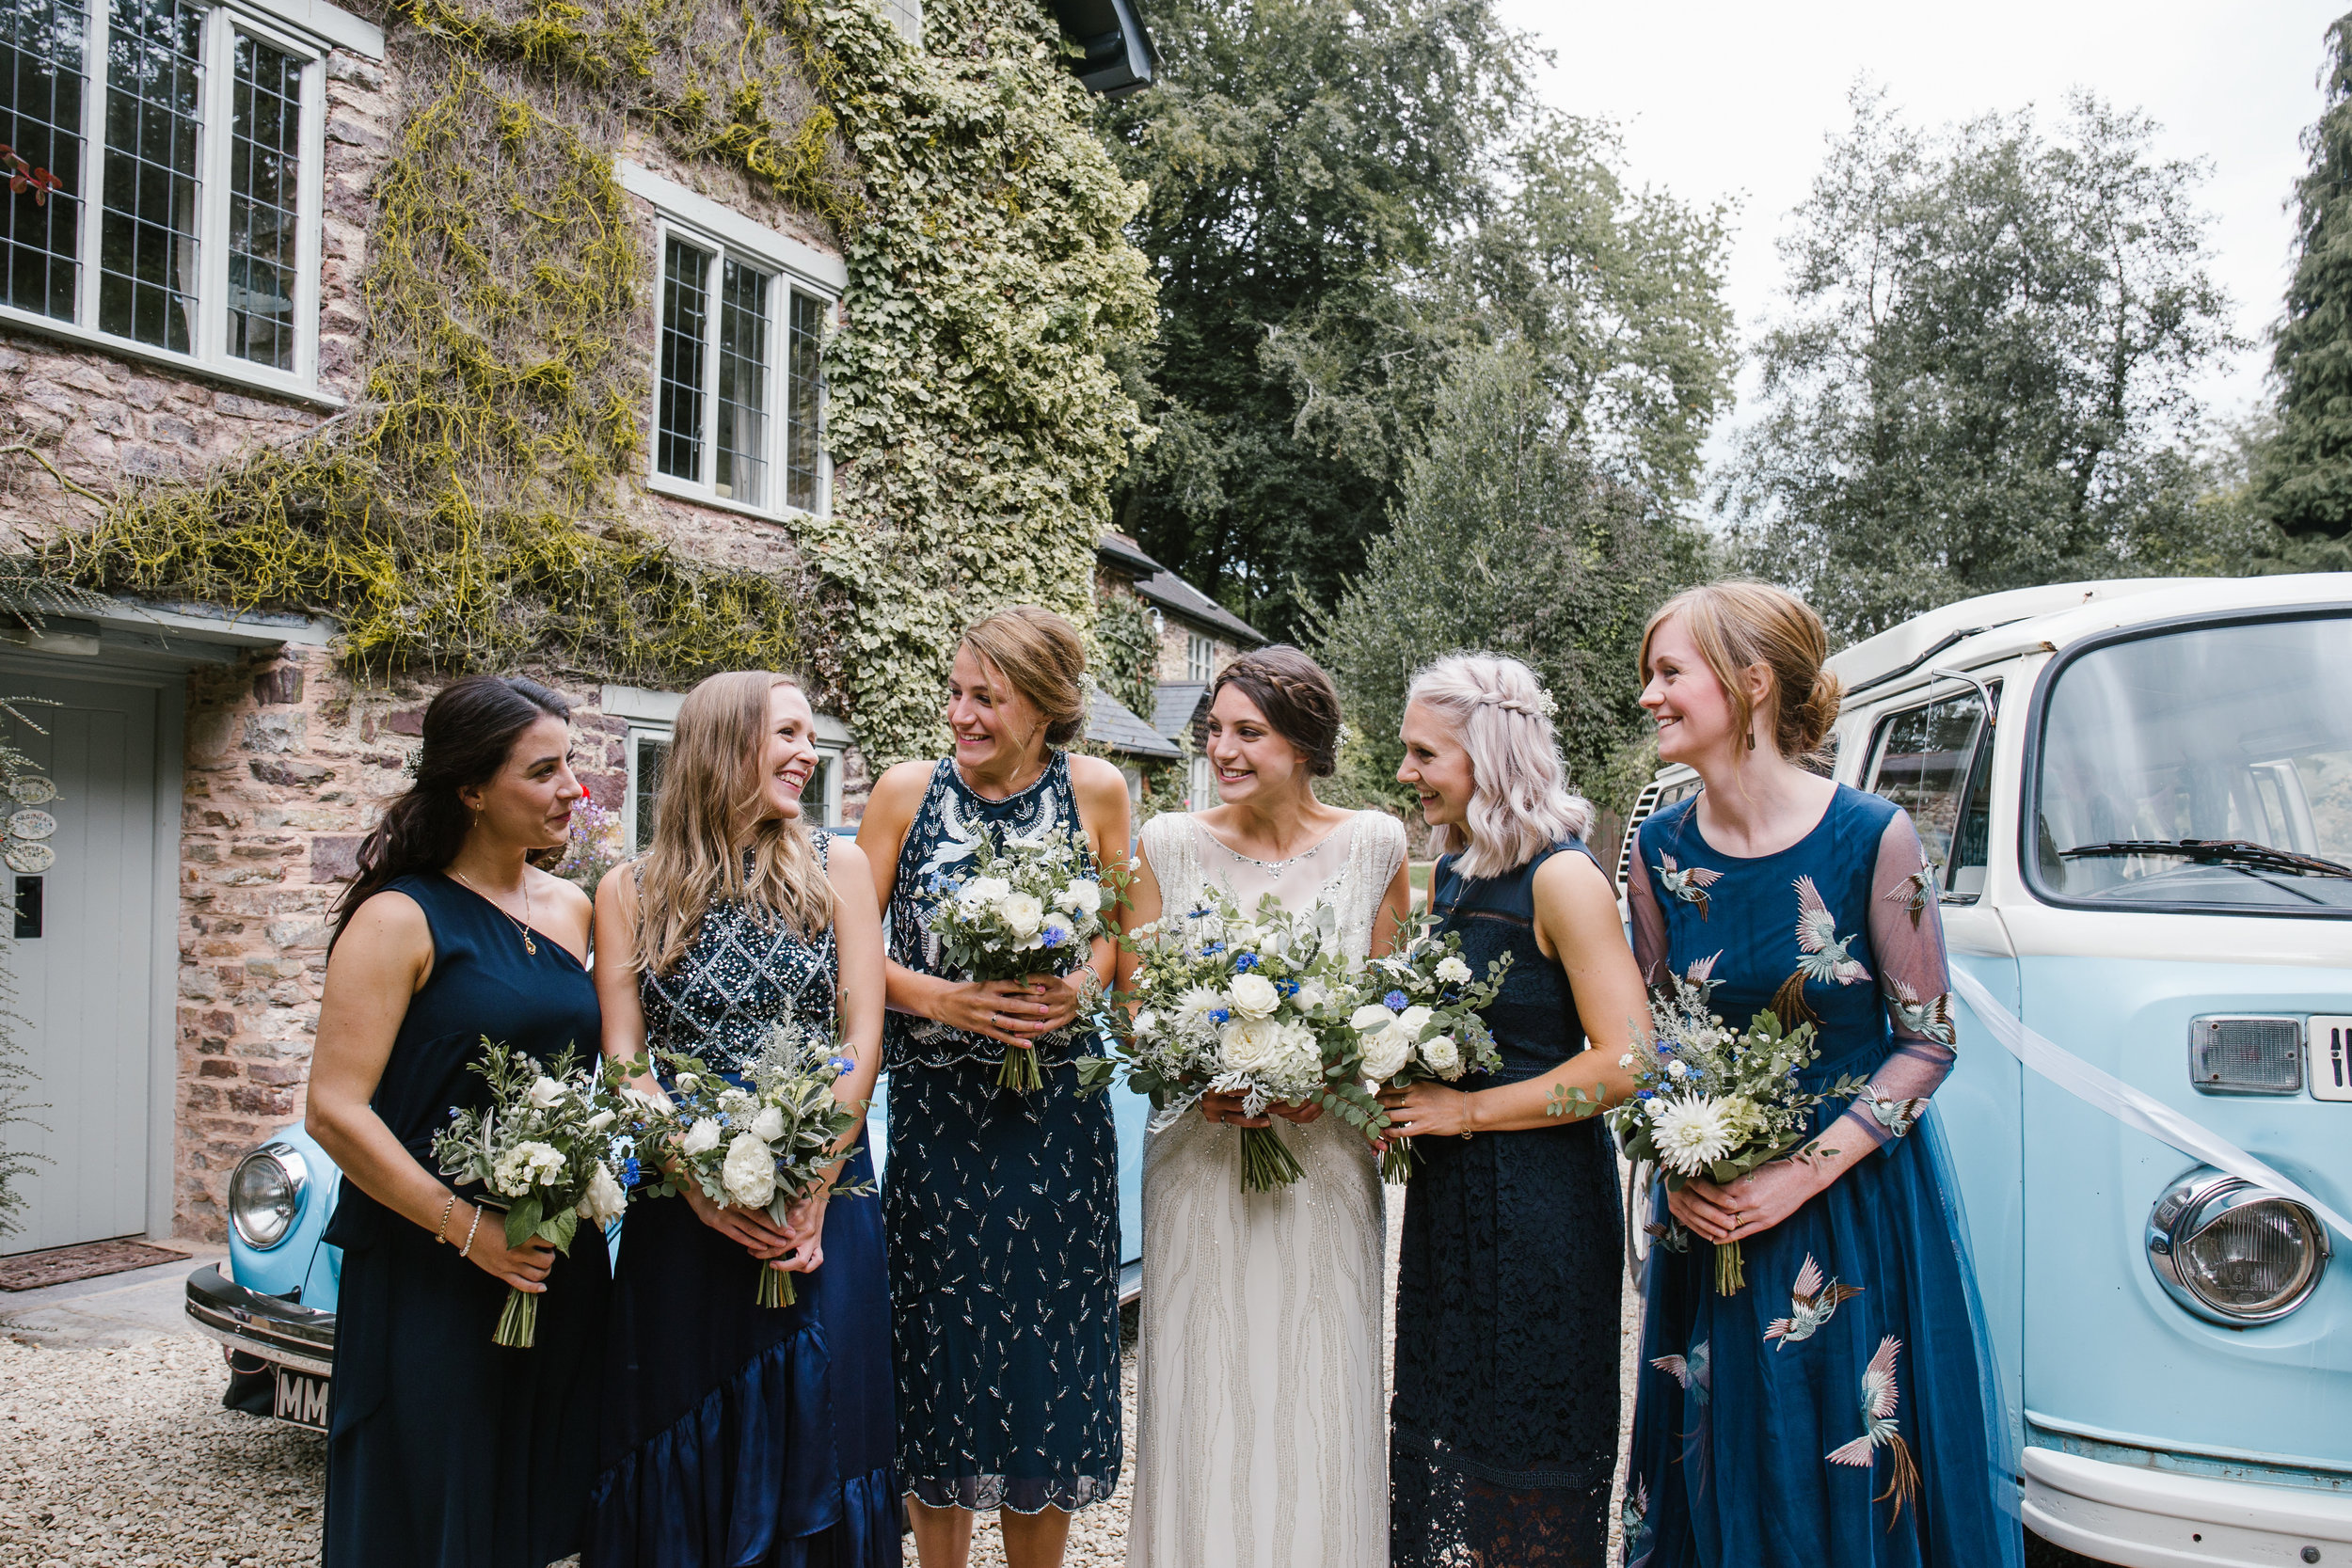 natural photo of bride and bridesmaids laughing together before the outdoor wedding ceremony